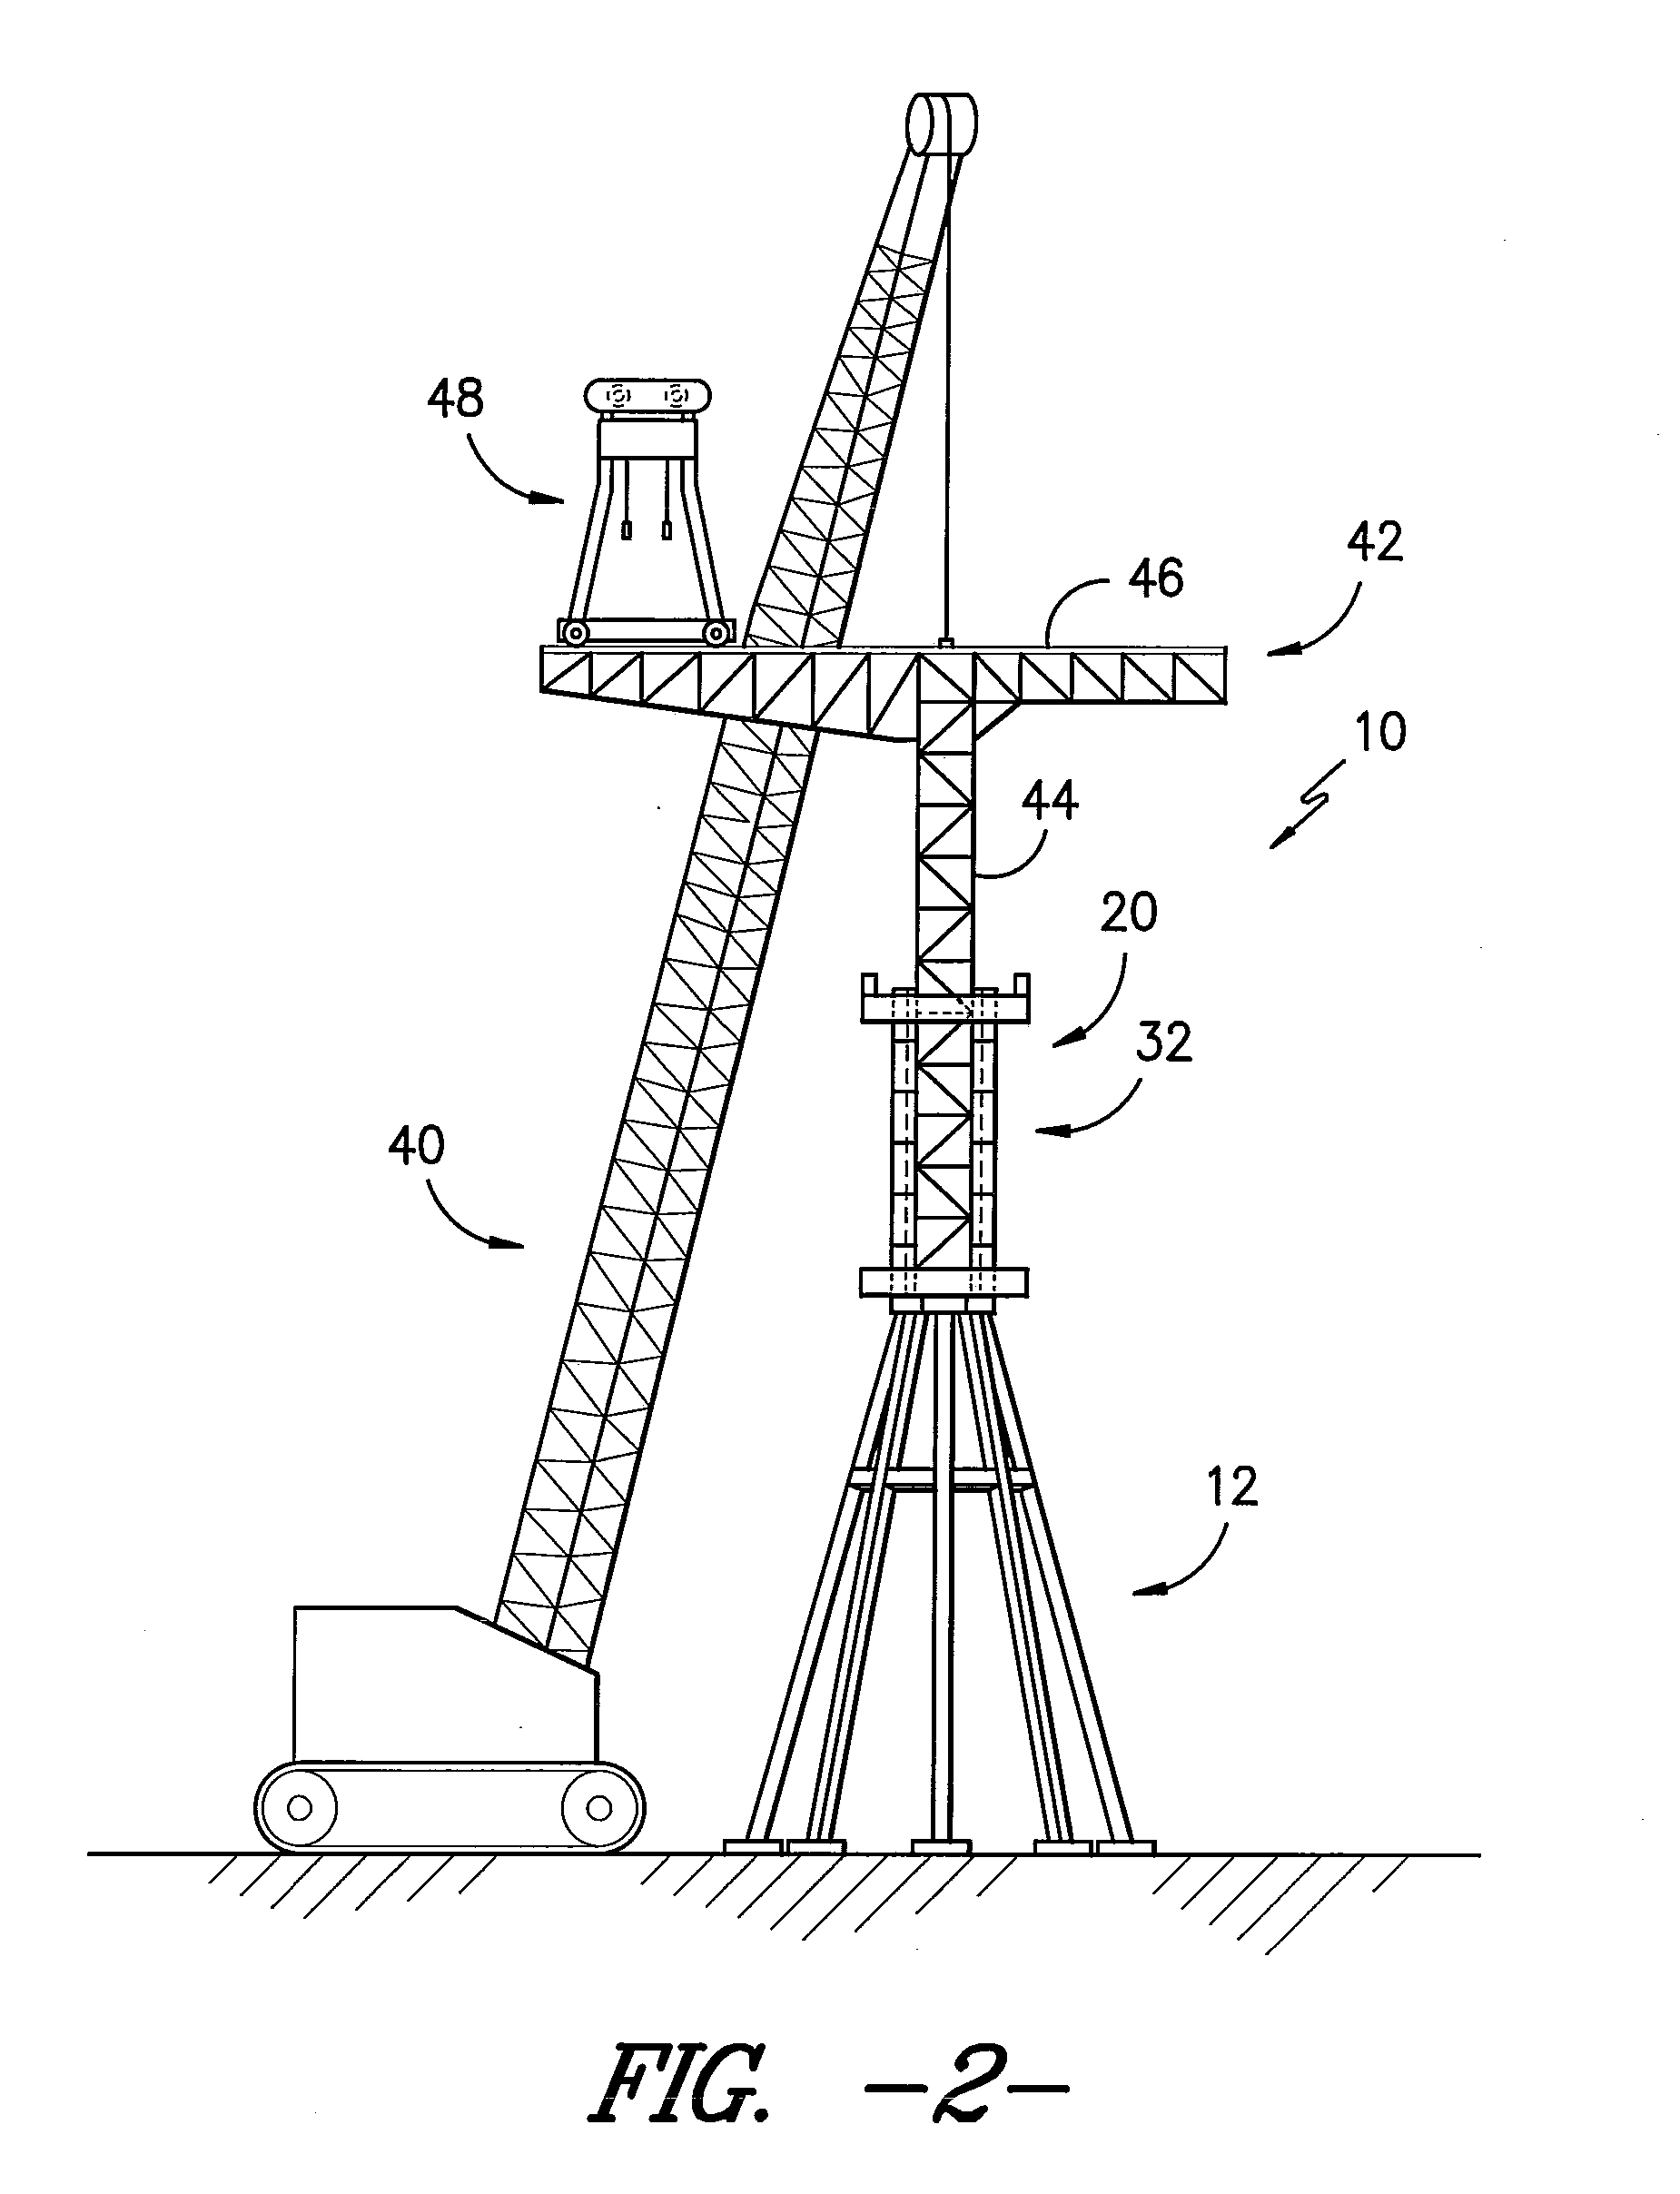 Tower erection system and method